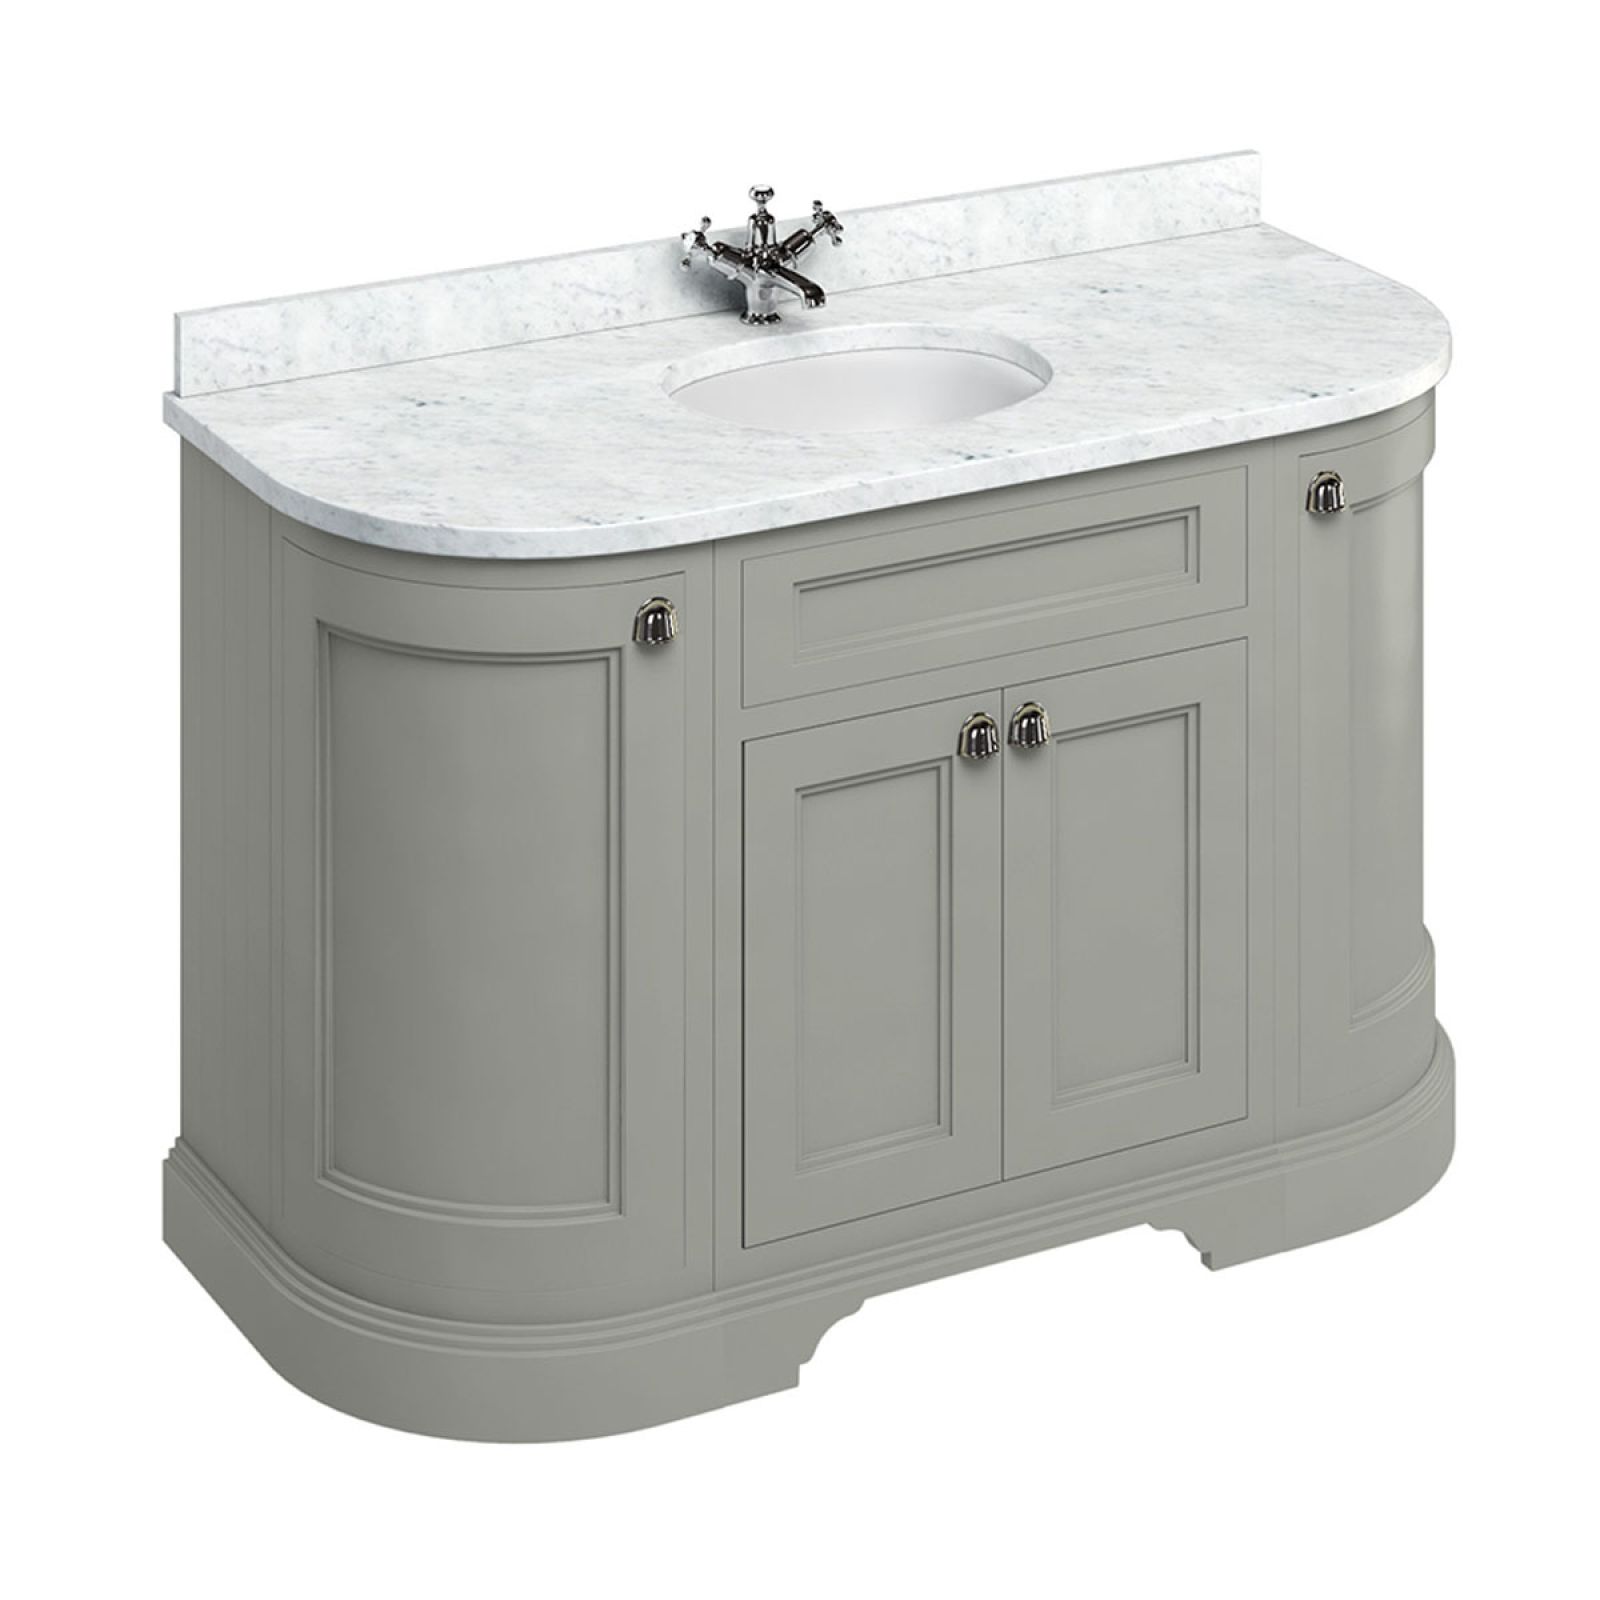 Freestanding 134cm wide curved Vanity Unit with Drawers, worktop and 1 inset basin